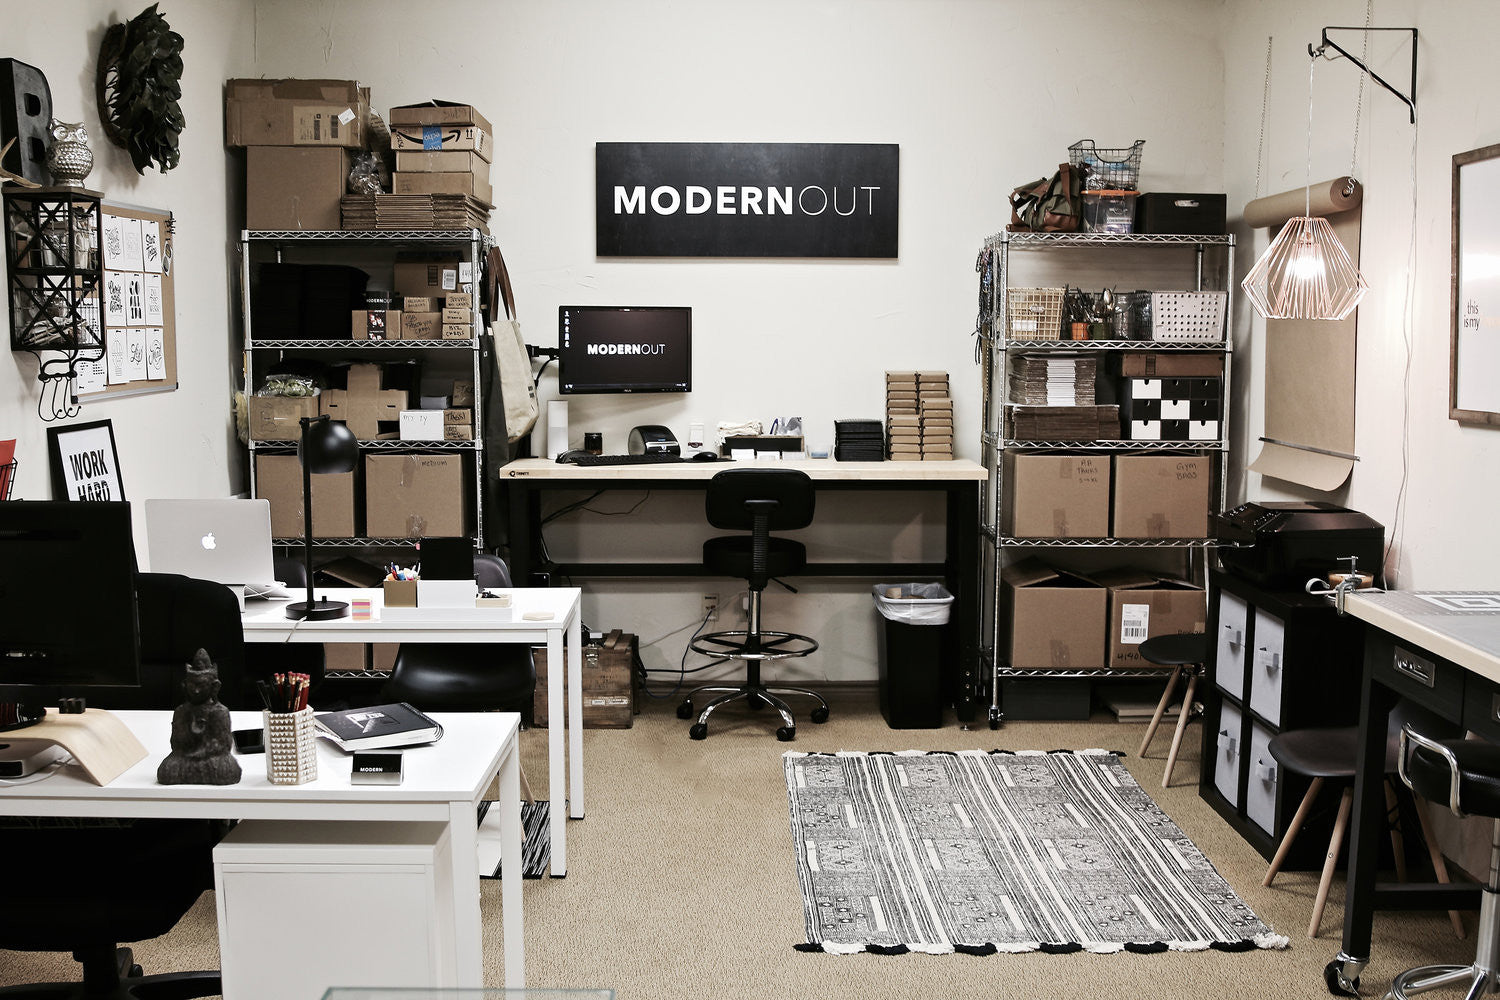 Modern Out Headquarters Tour